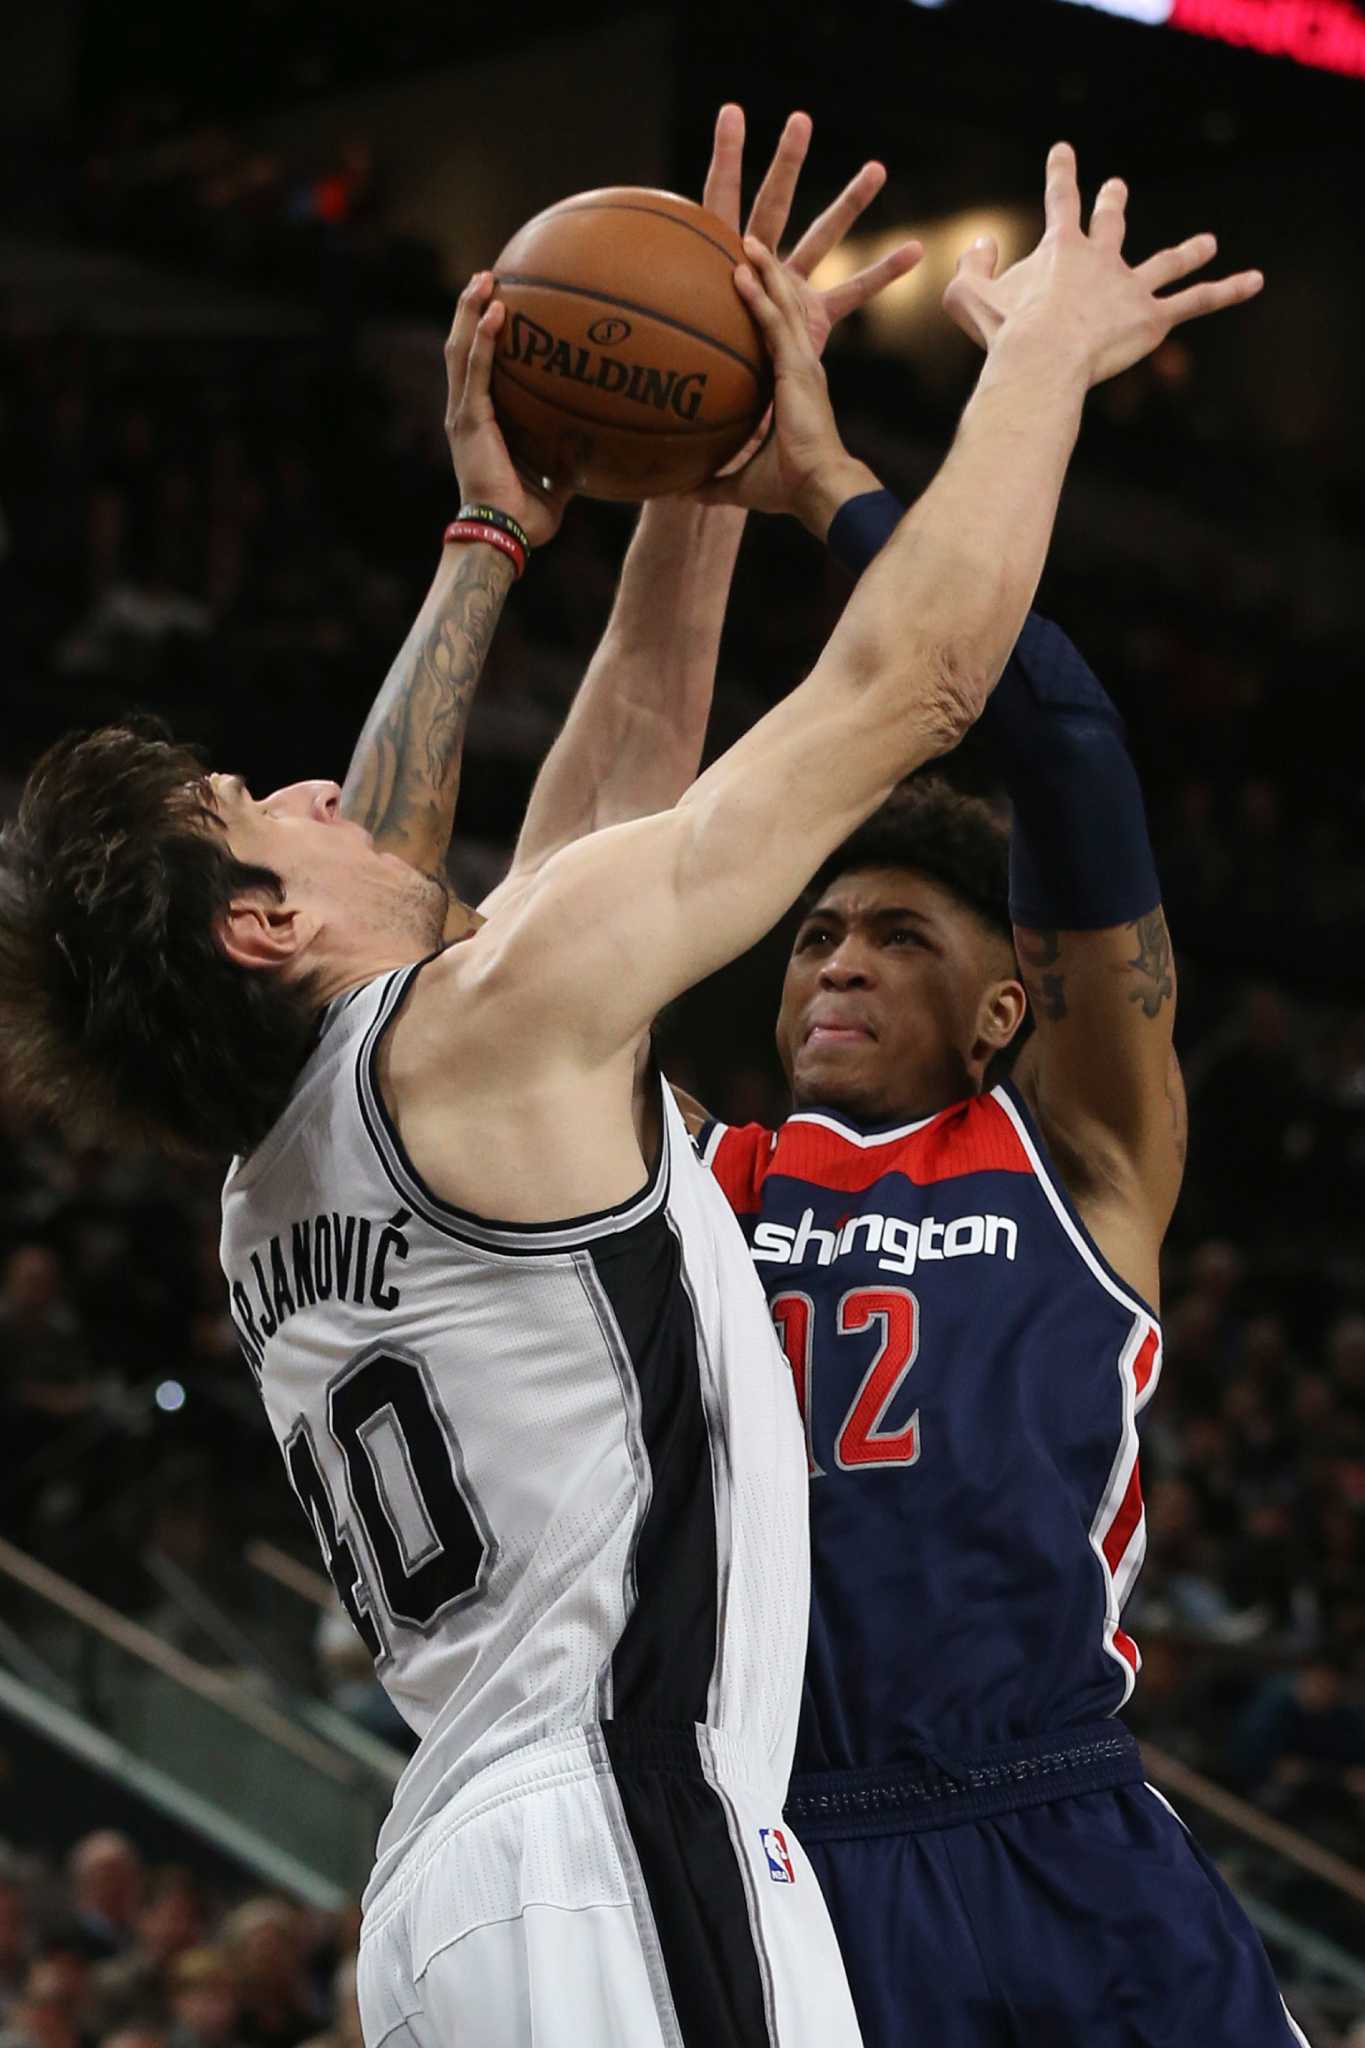 Boban Marjanovic throws down a flat-footed dunk